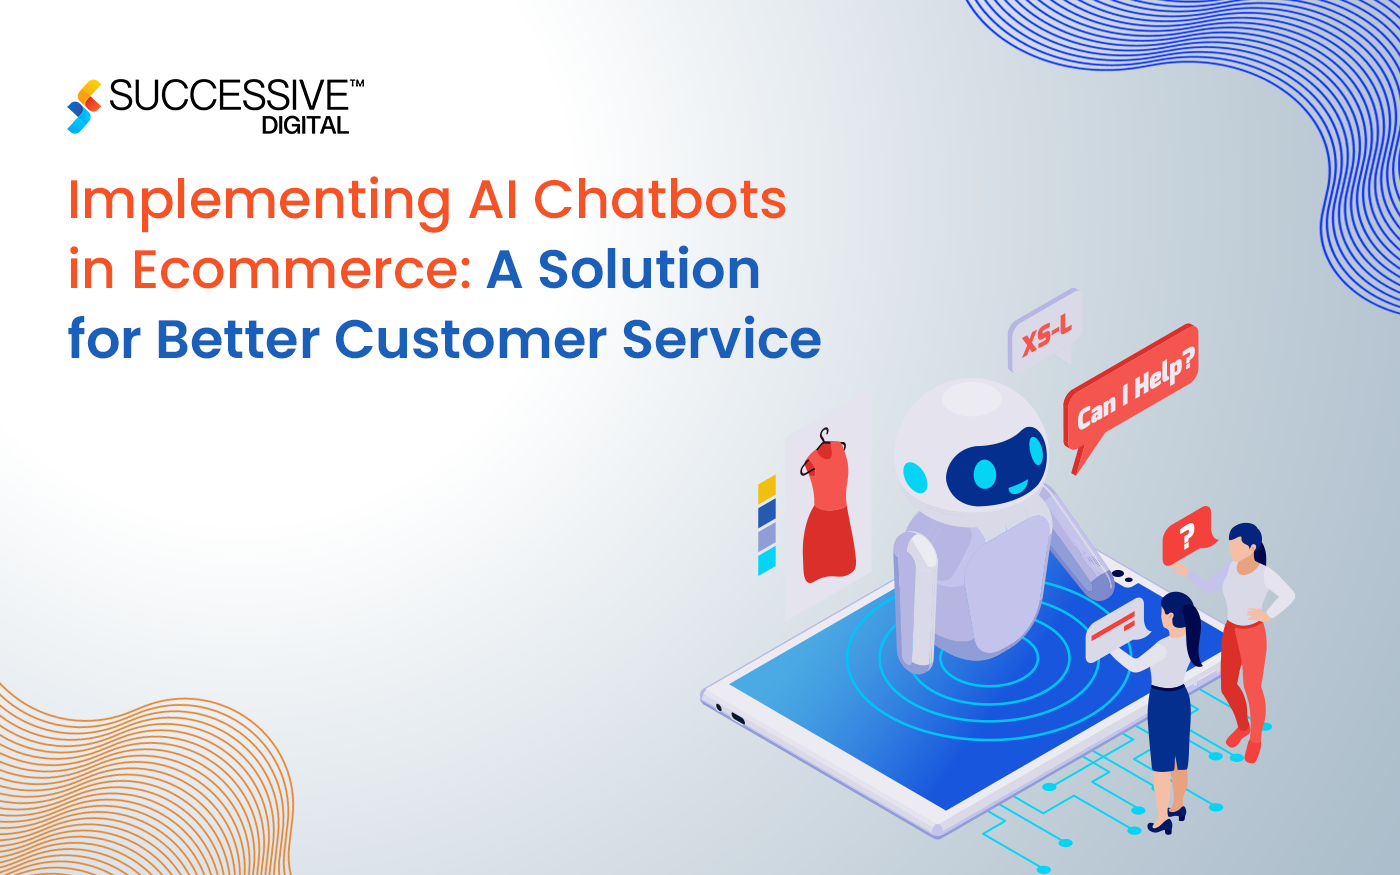 Implementing AI Chatbots in Ecommerce: A Solution for Better Customer Service